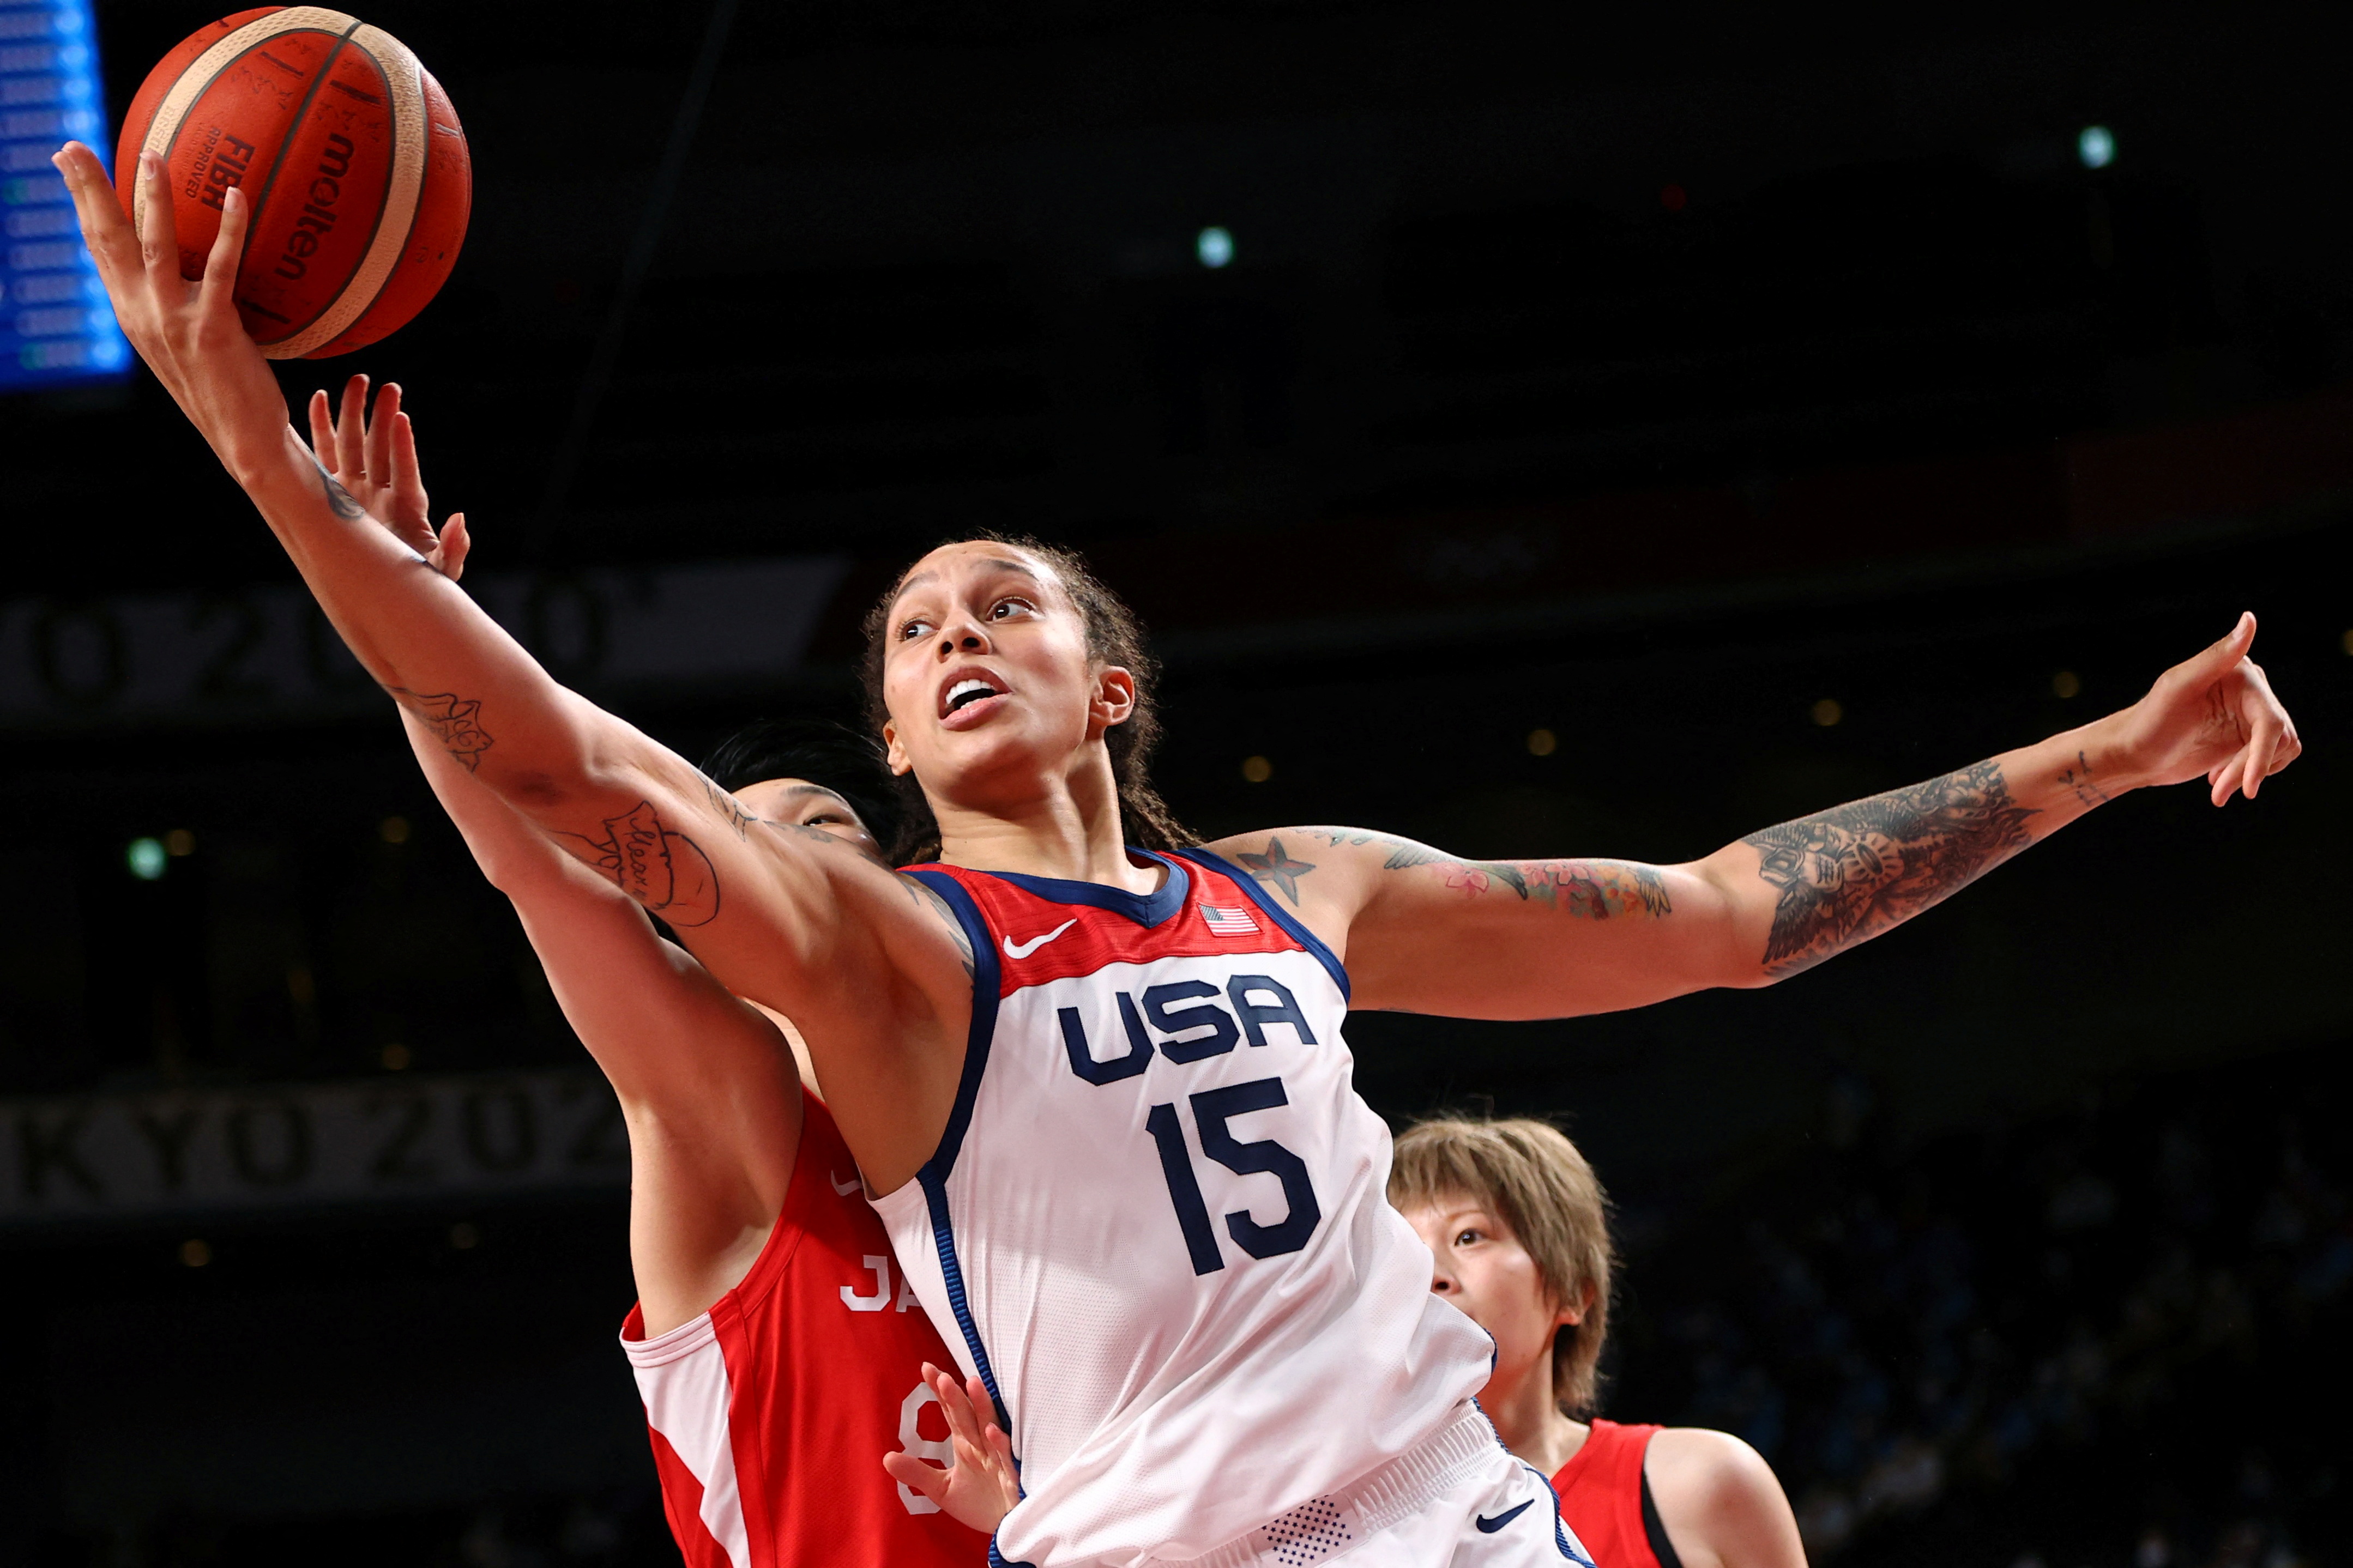 Getting Griner home the 'number one priority' for NBA, WNBA, says Silver